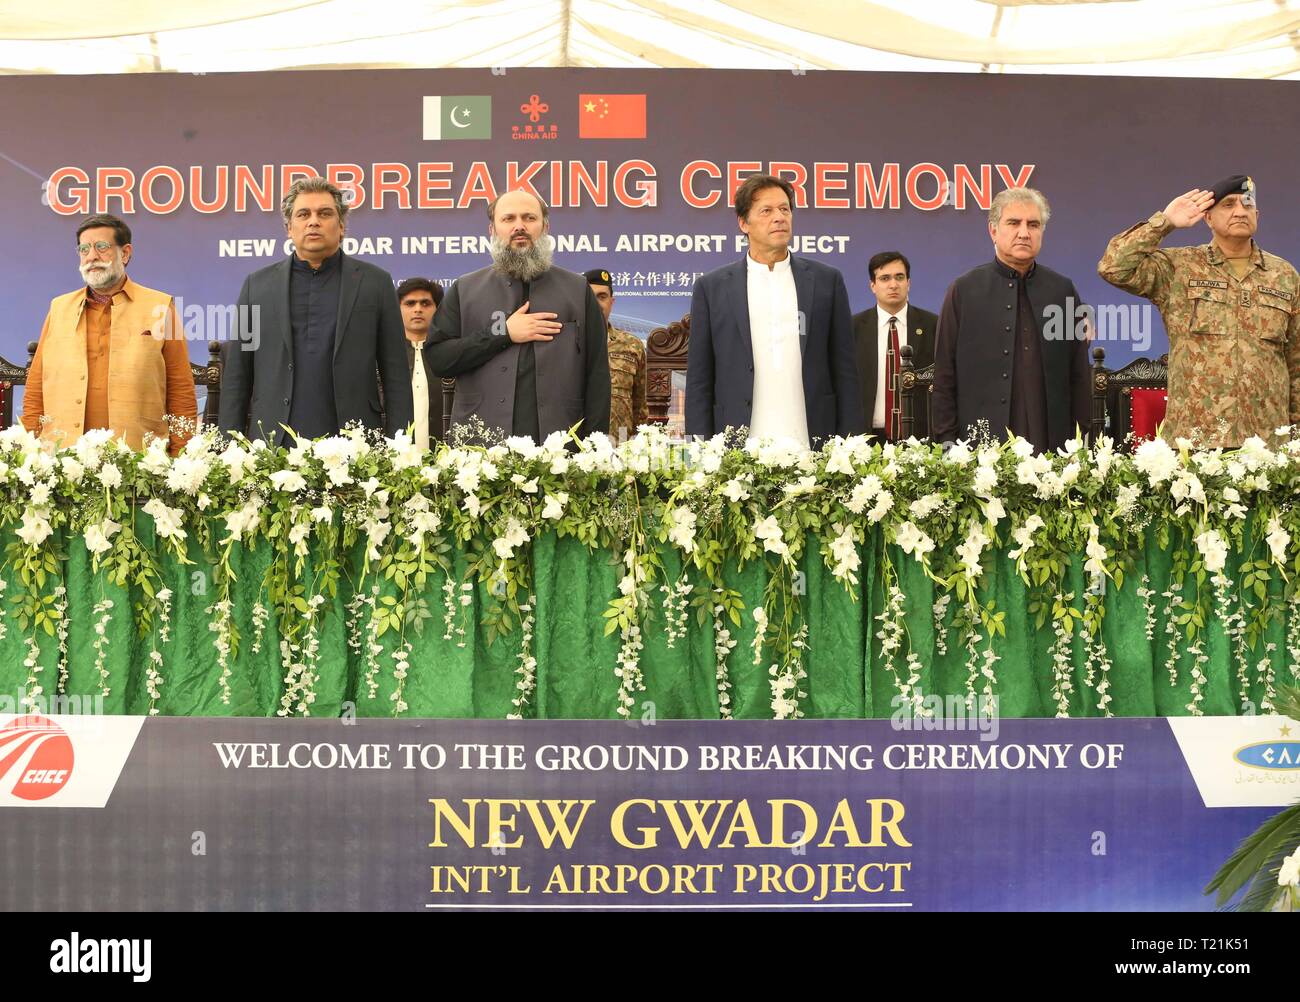 Gwadar, Pakistan. 29th Mar, 2019. Pakistani Prime Minister Imran Khan (3rd R) attends the ground breaking ceremony of the new Gwadar International Airport Project in Gwadar, Pakistan, on March 29, 2019. Pakistan broke ground for the construction of the China-funded new Gwadar International Airport on Friday, which would link Pakistan's fast-rising southwest Gwadar port city with the rest of the world. Credit: Liu Tian/Xinhua/Alamy Live News Stock Photo